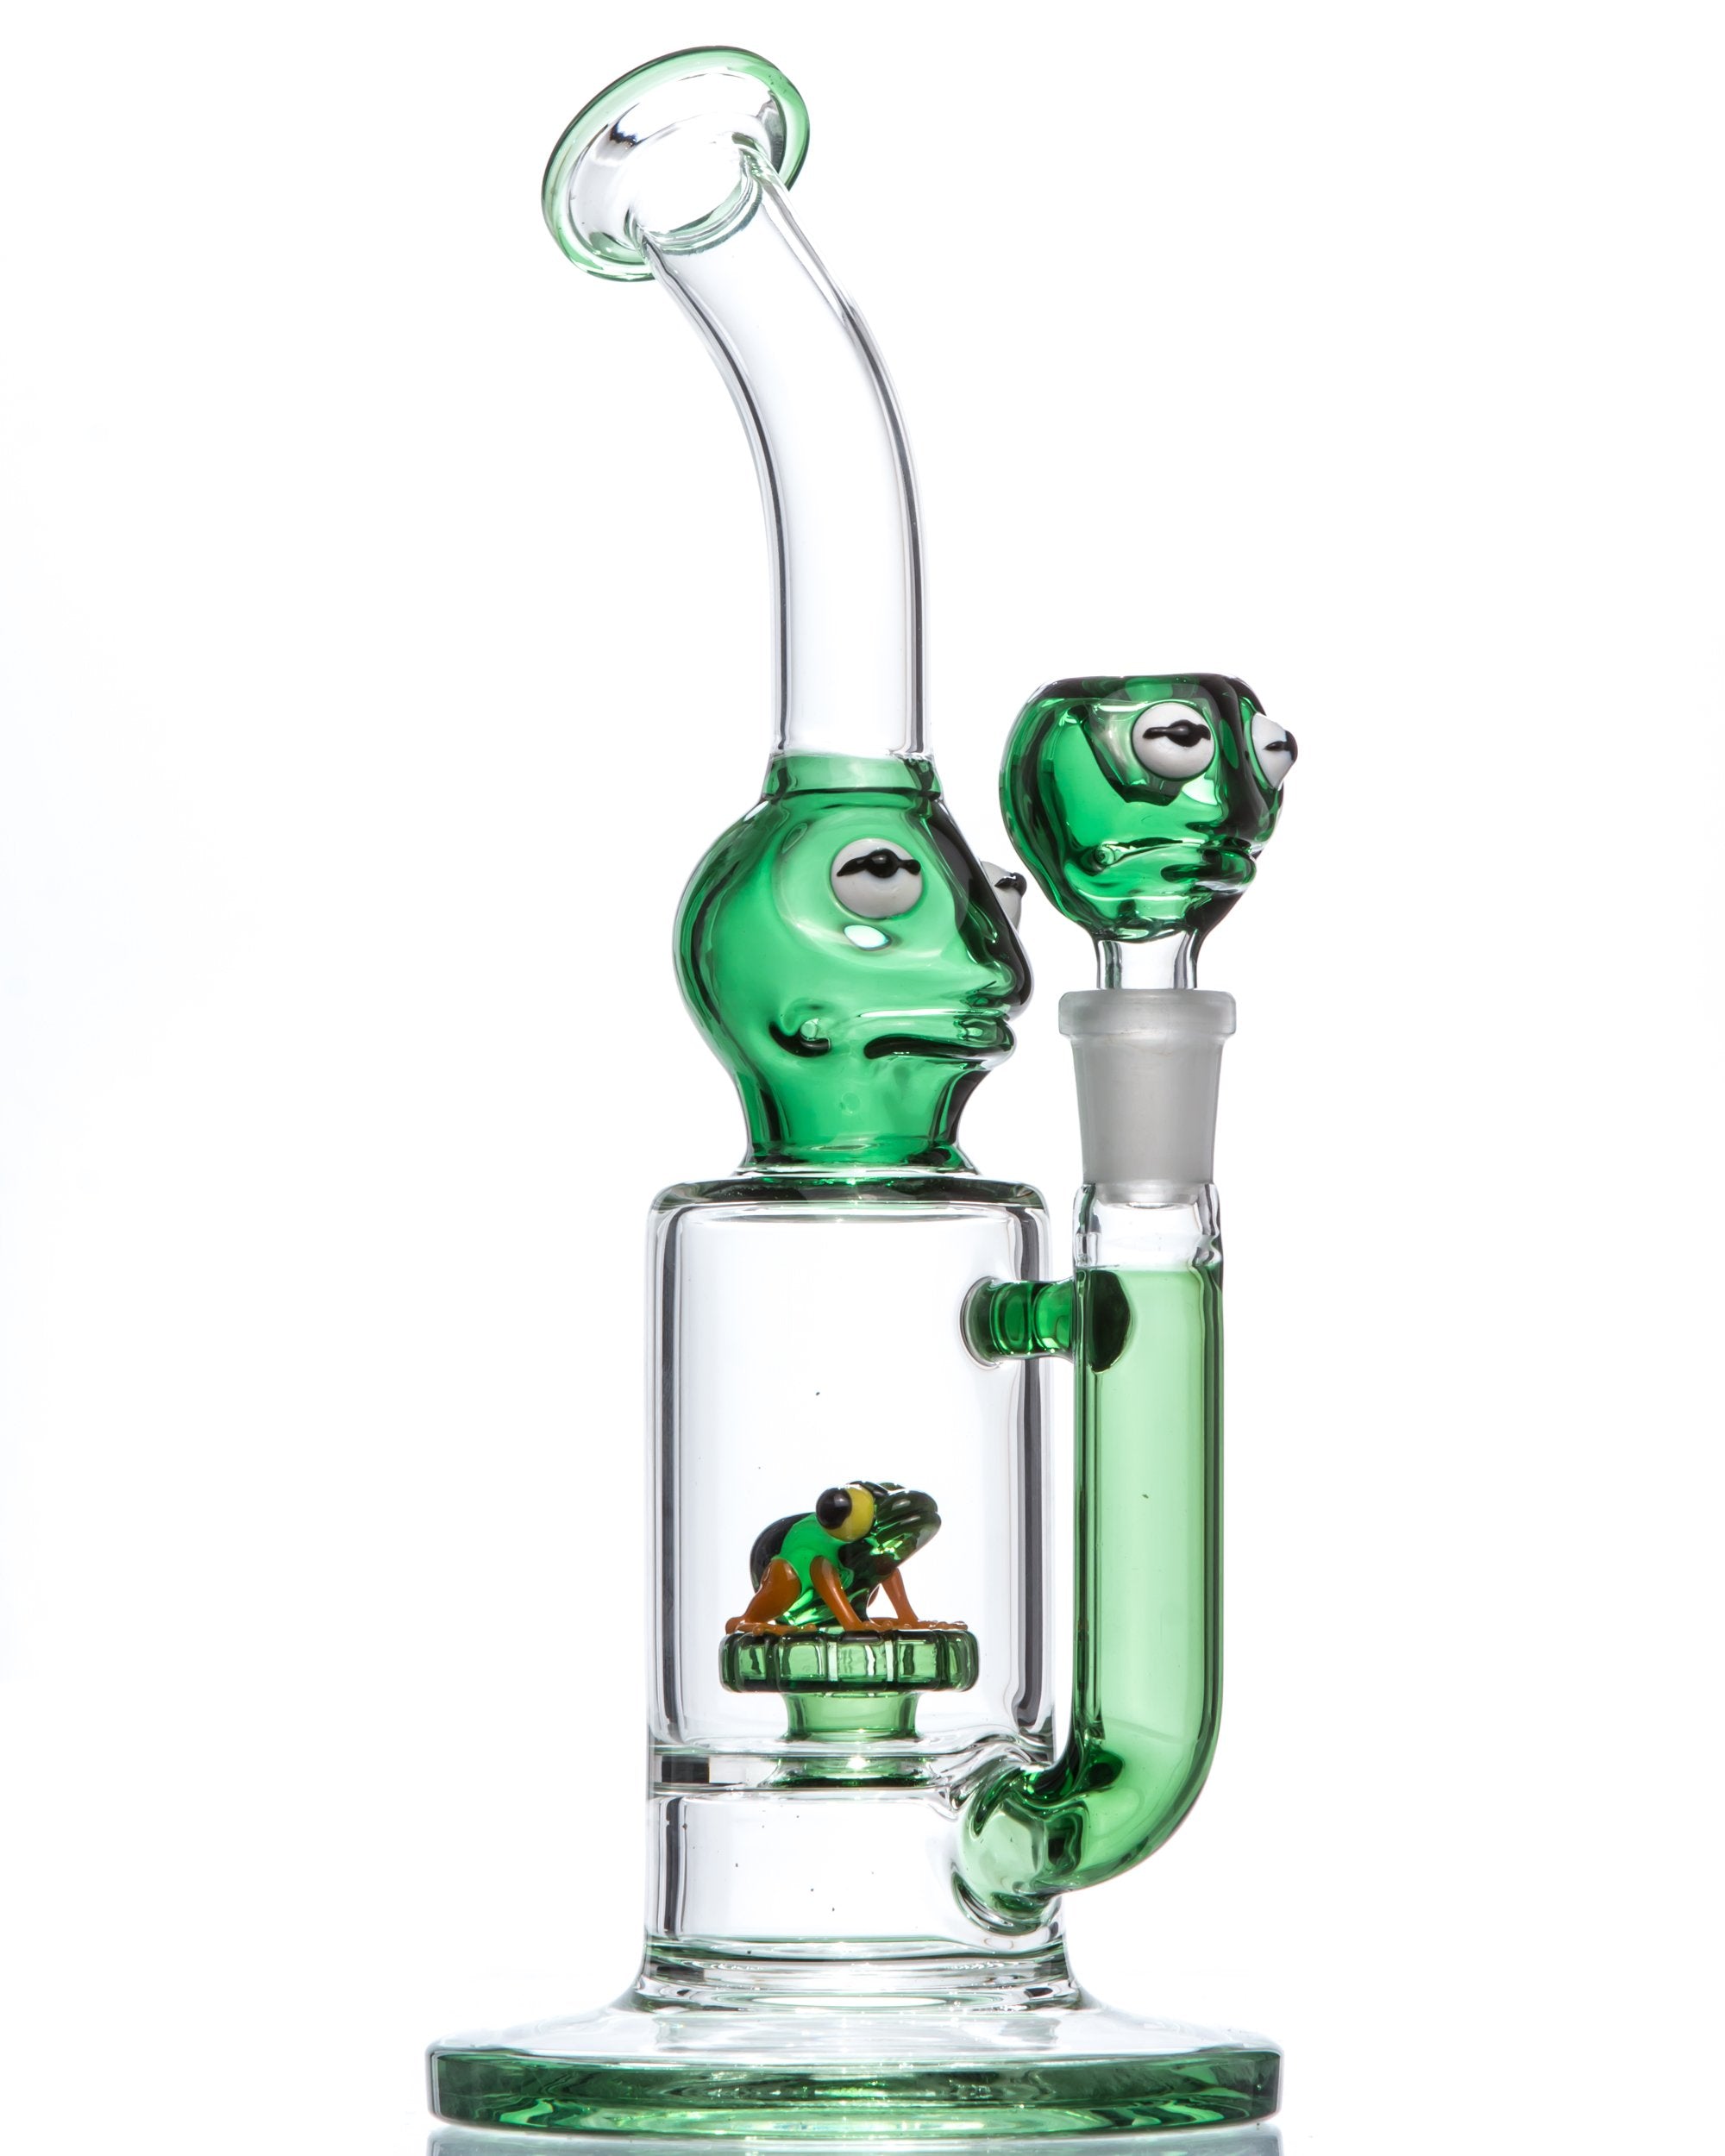 Heady Glass Vs. Scientific Glass: What’s the Difference?